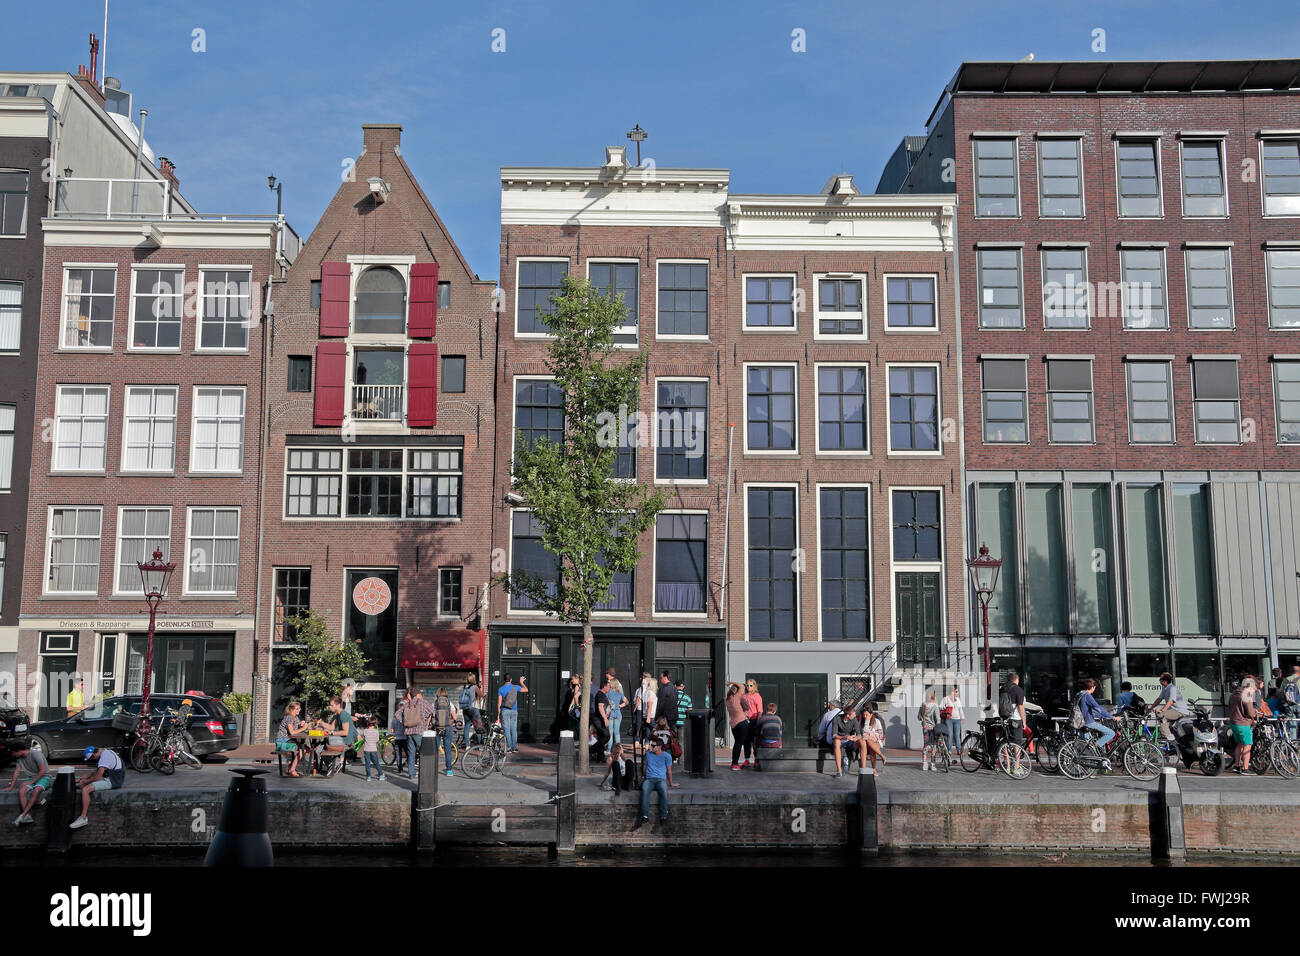 The Anne Frank House (in the centre directly behind the tree) in Amsterdam, Netherlands. Stock Photo